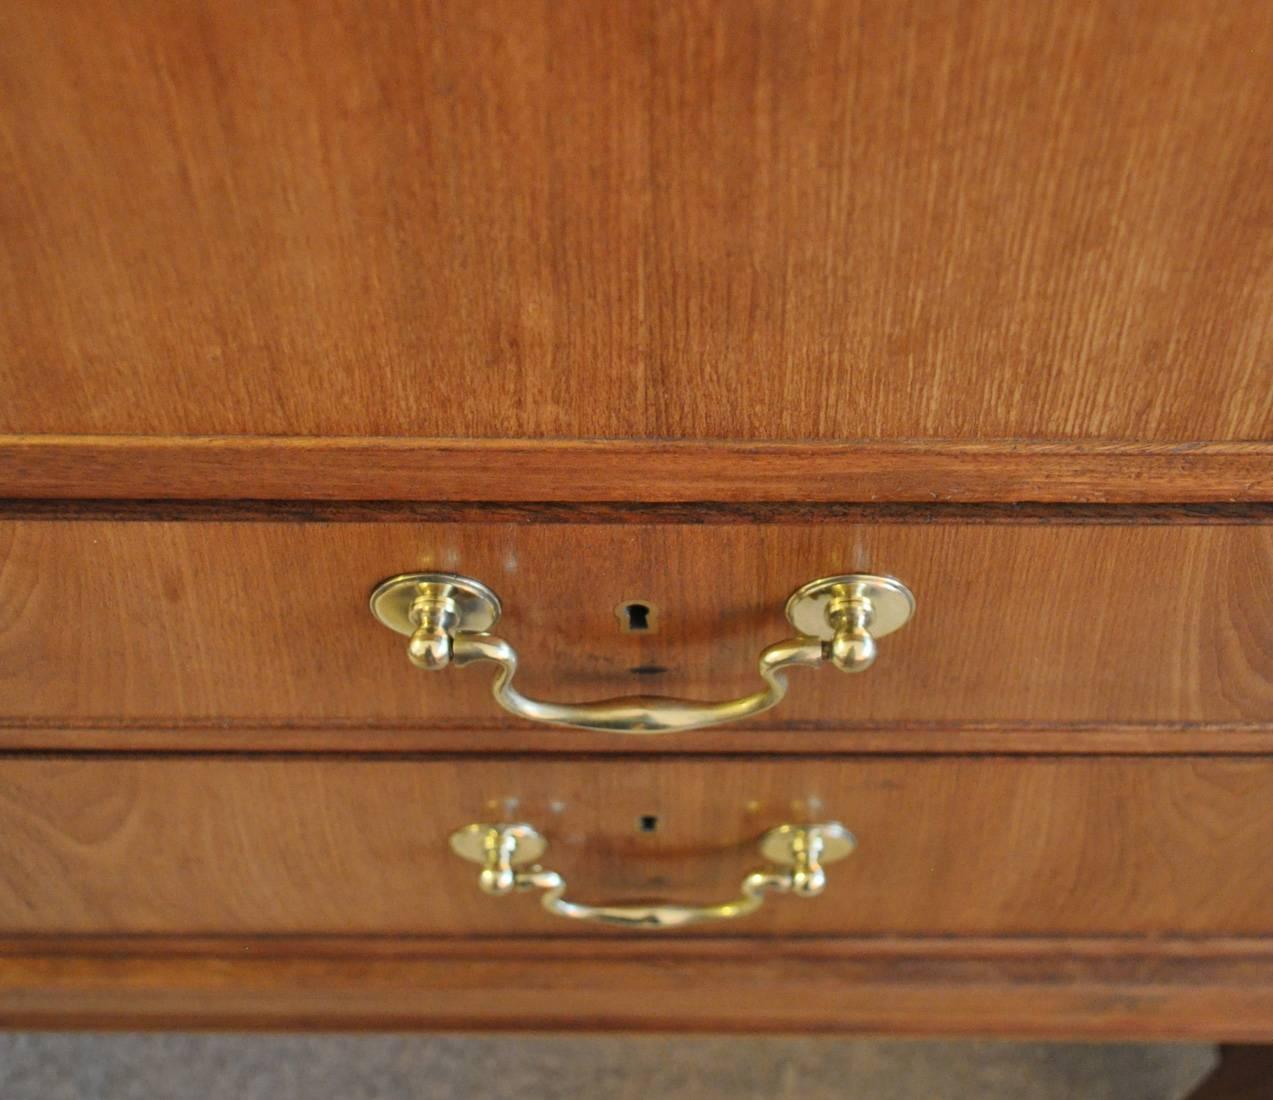 Beautiful Danish cabinet of Cuban mahogany with brass pulls.
Designed and made by cabinetmaker Jacob Kjær.
Jacob Kjær became one of the most prominent Danish master carpenters.
He focused especially on high-quality craftsmanship and was Chairman